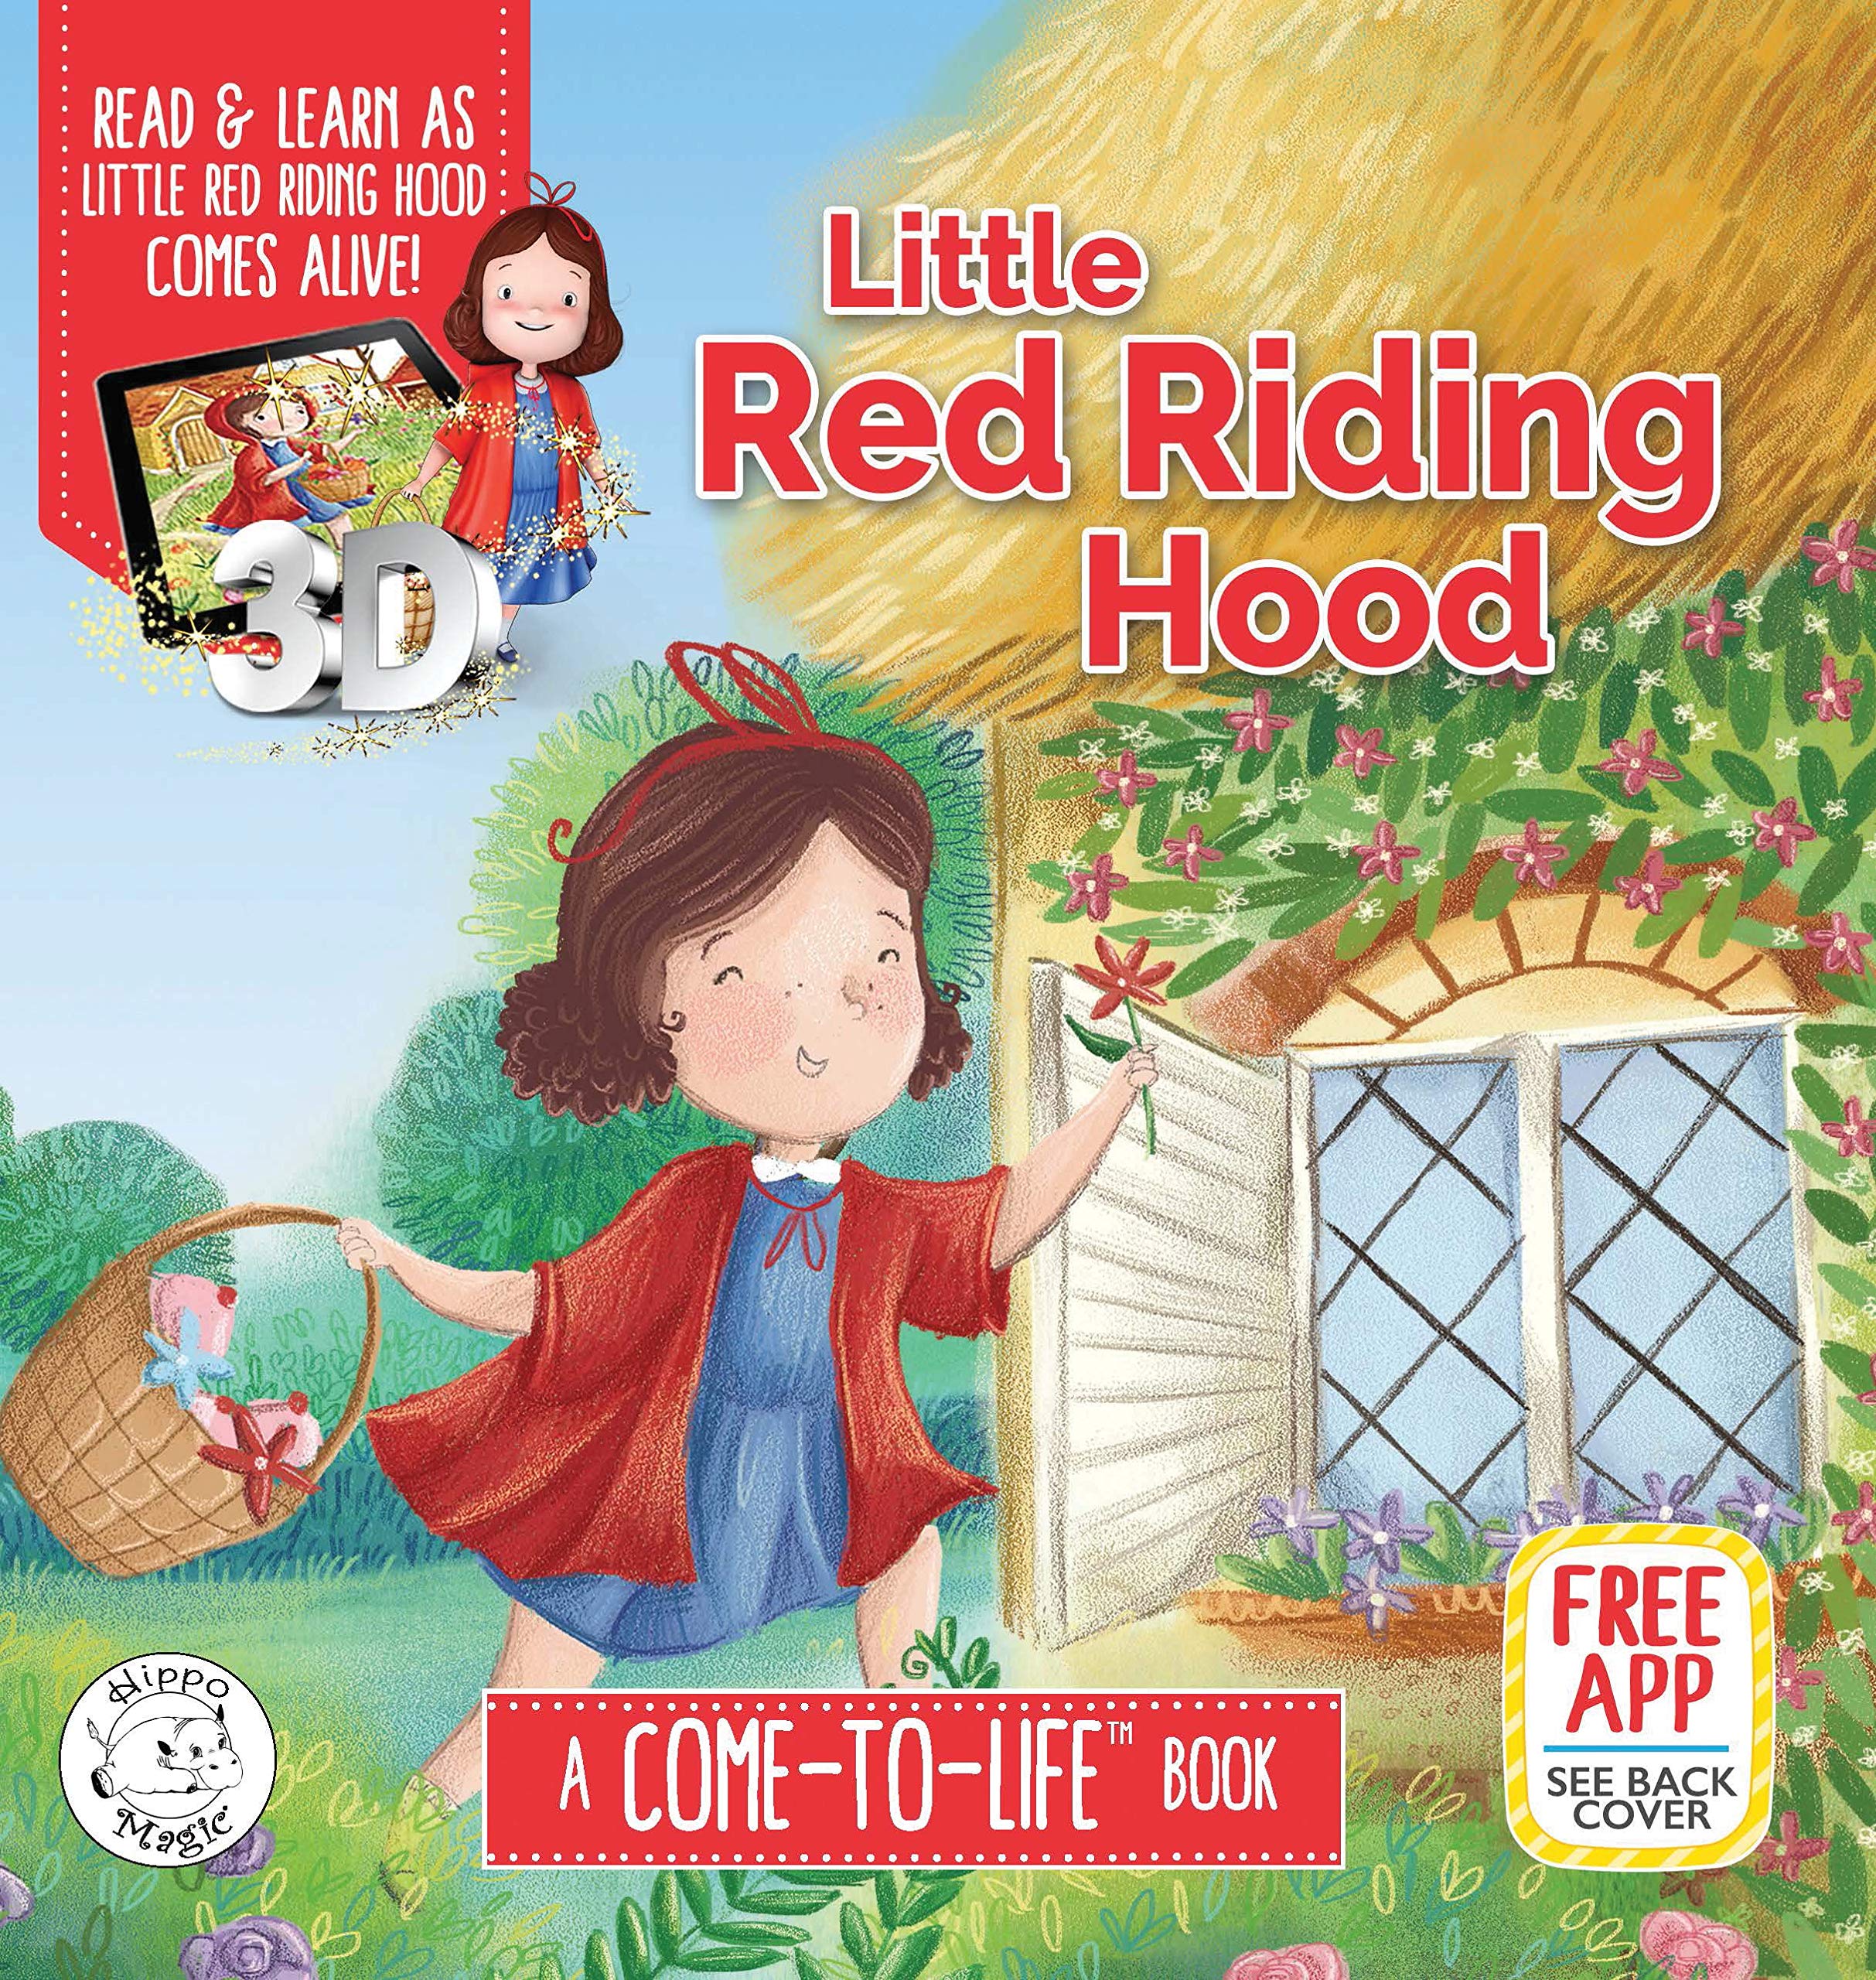 Little Red Riding Hood Augmented Reality Come-to-Life Book - Little Hippo Books